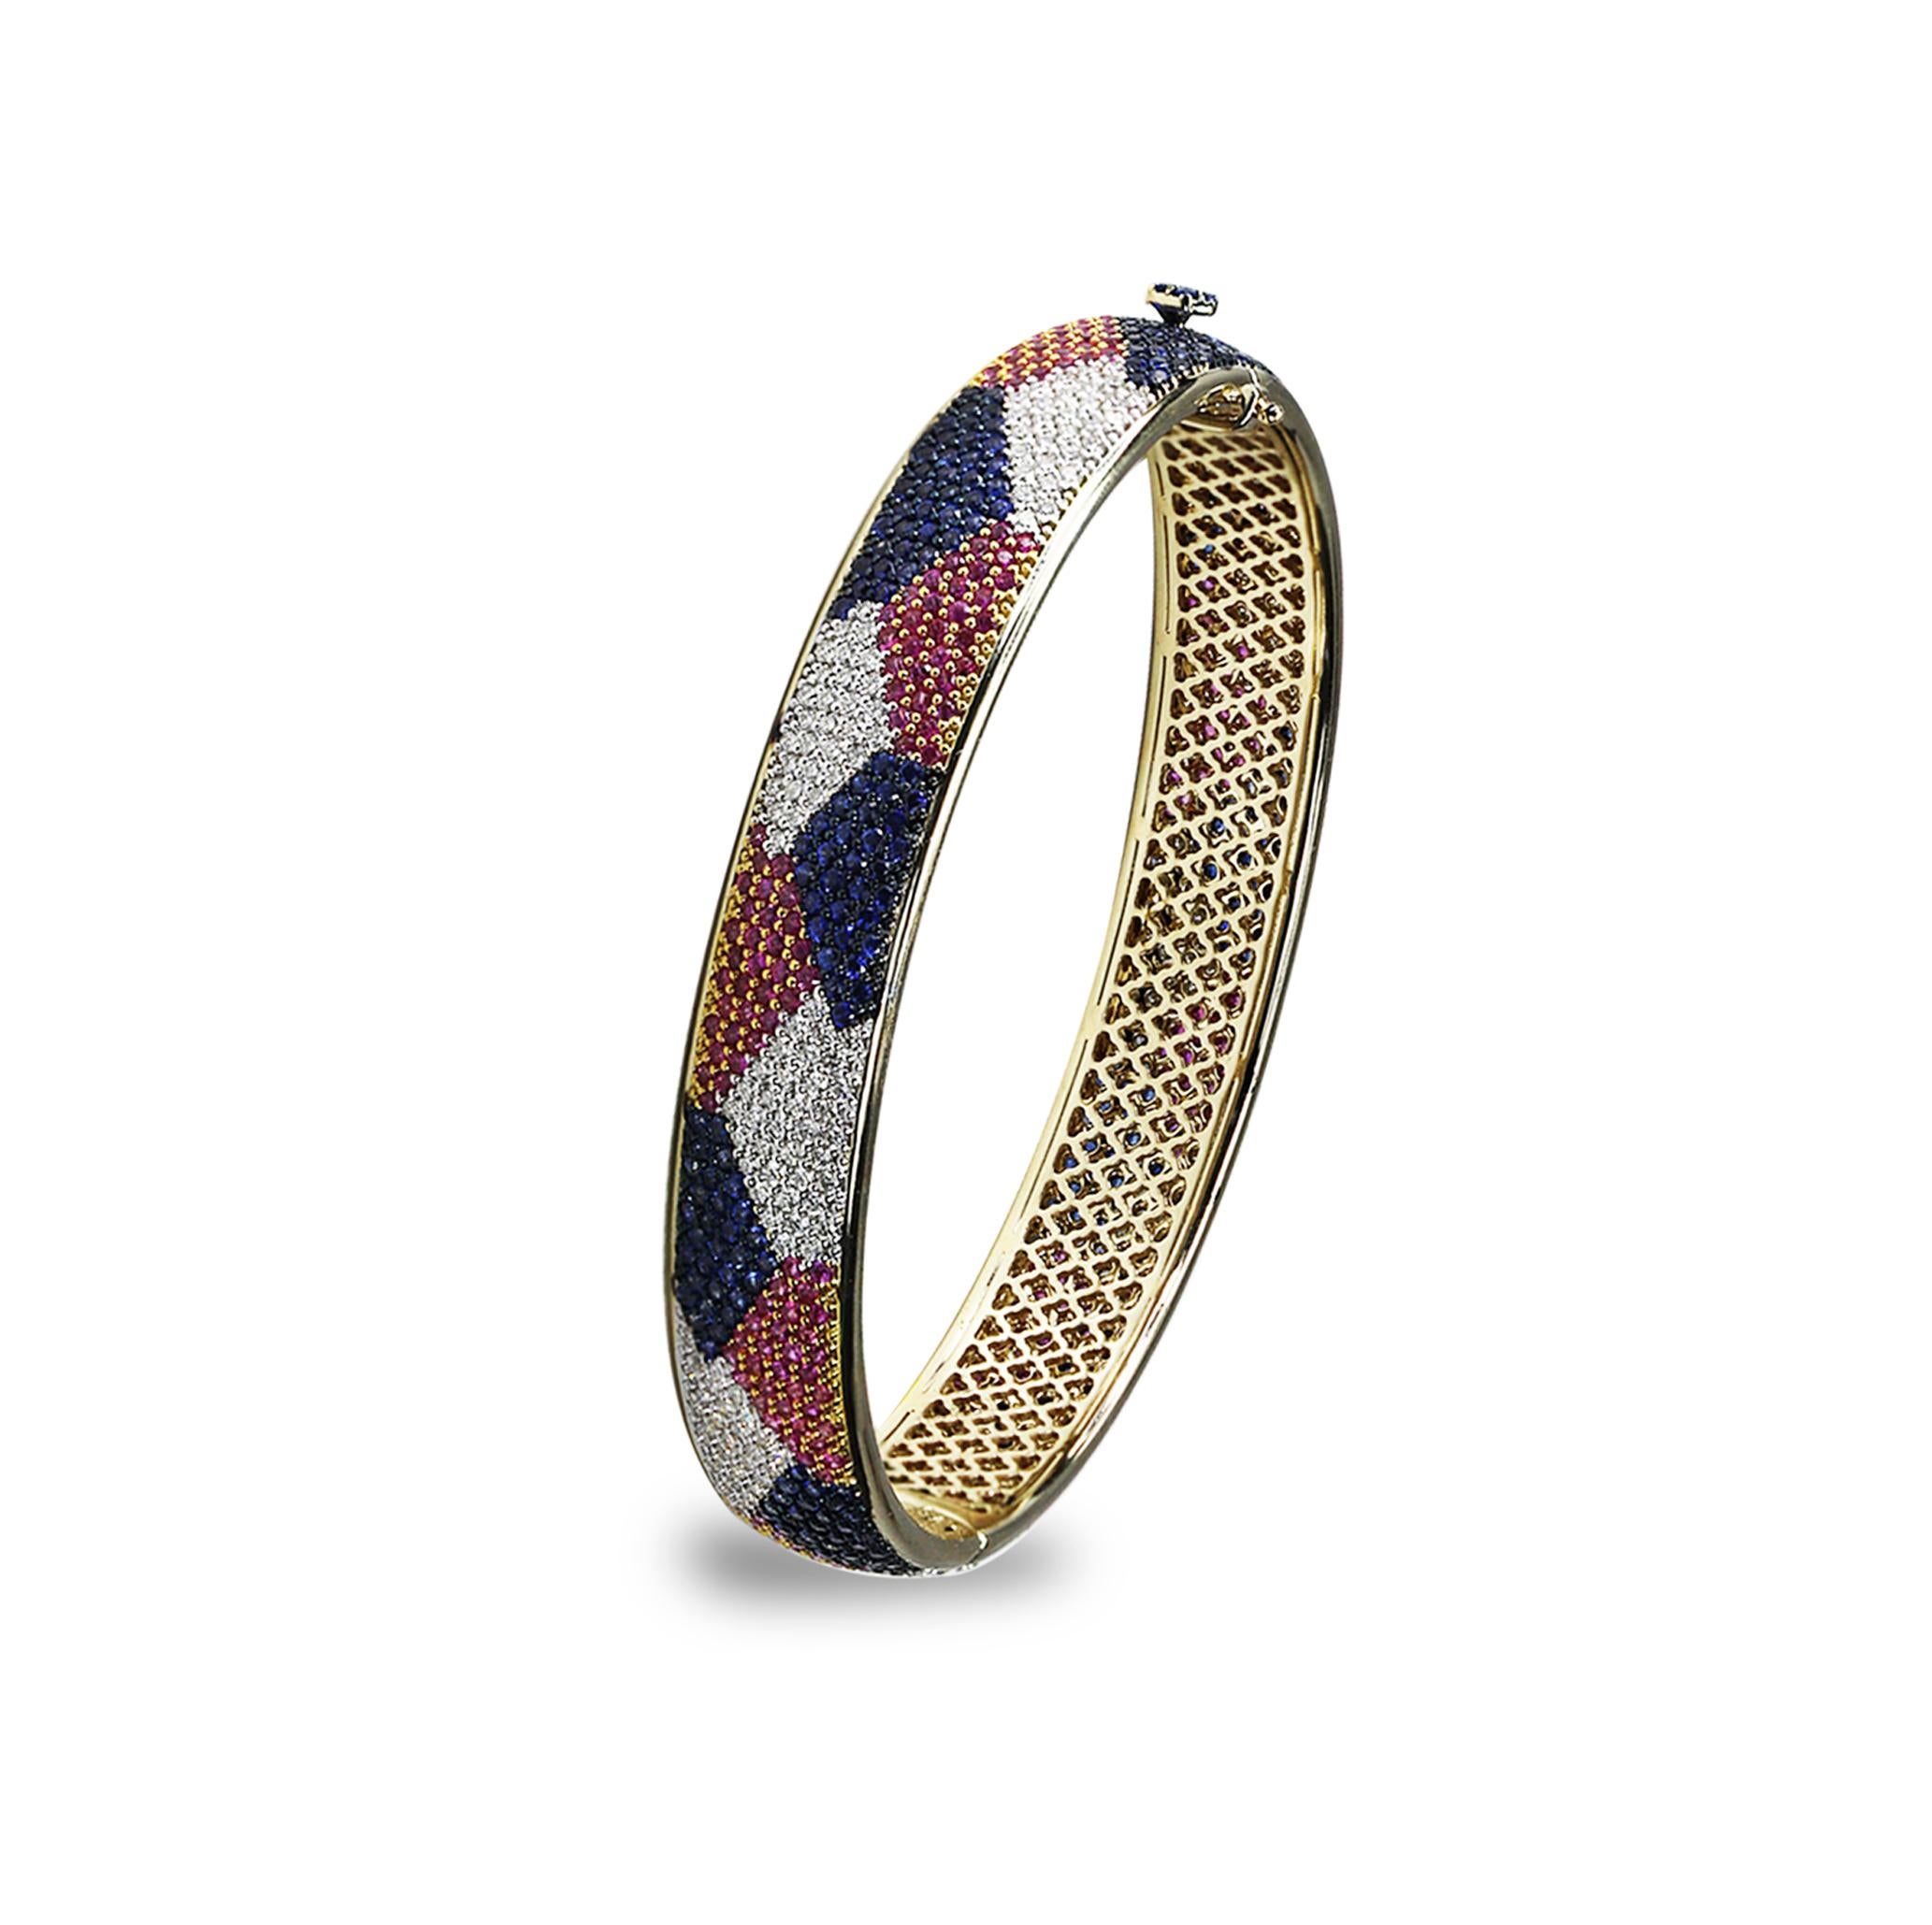 Blue and pink sapphires and diamond bracelet

Combining varying colours artfully is this 18K white gold slim bangle that brings together blue and pink sapphires juxtaposed with diamonds in a simple pave setting. While multi-hued, the piece is also